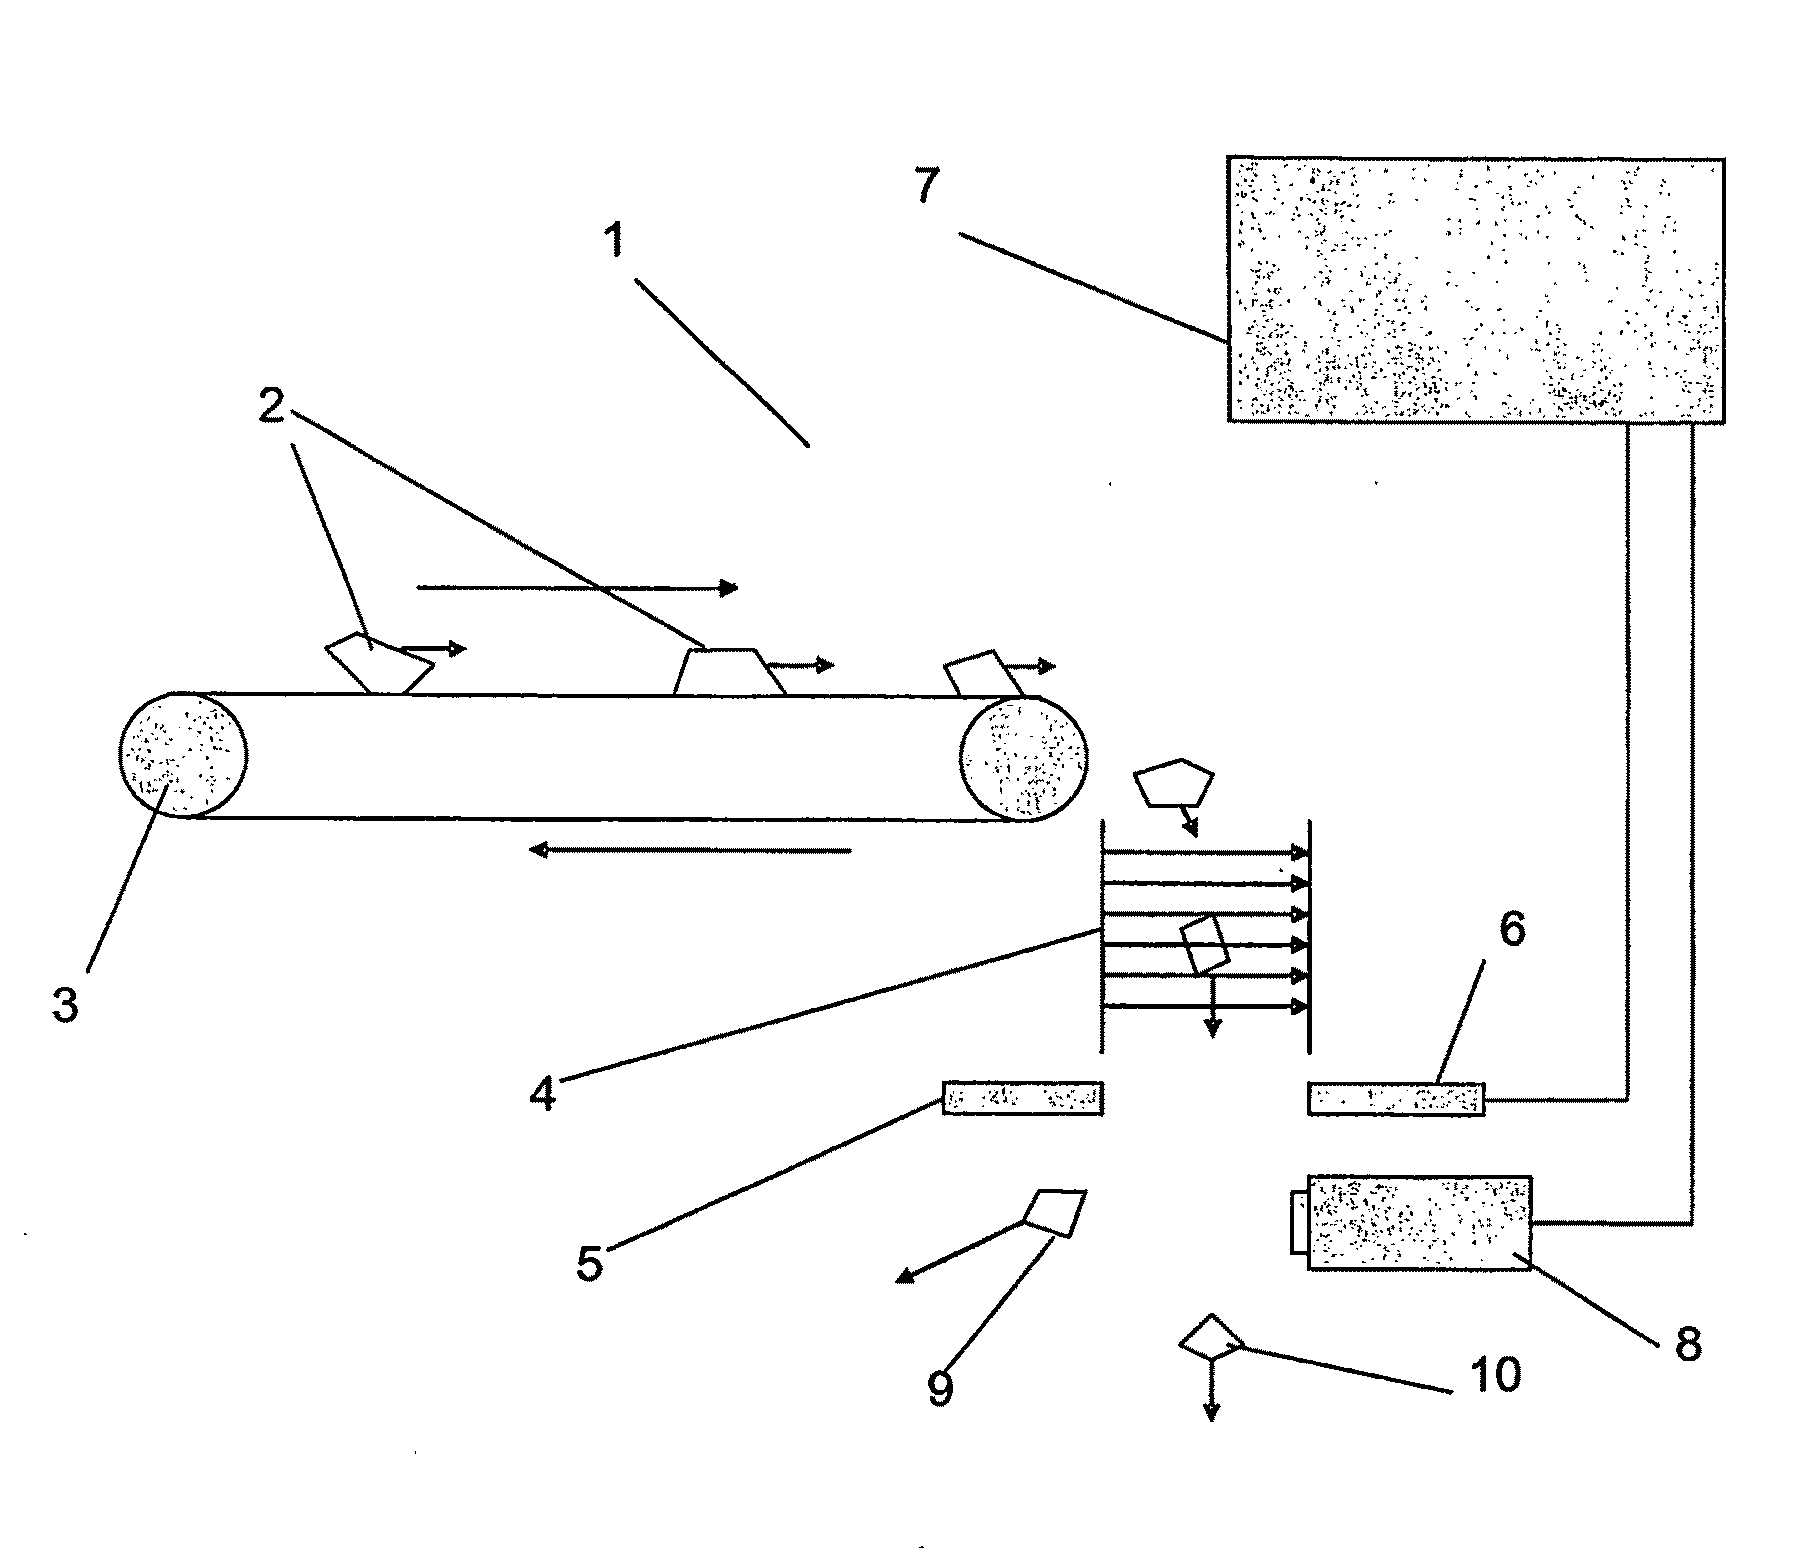 Method of Determining the Presence of a Mineral Within a Material